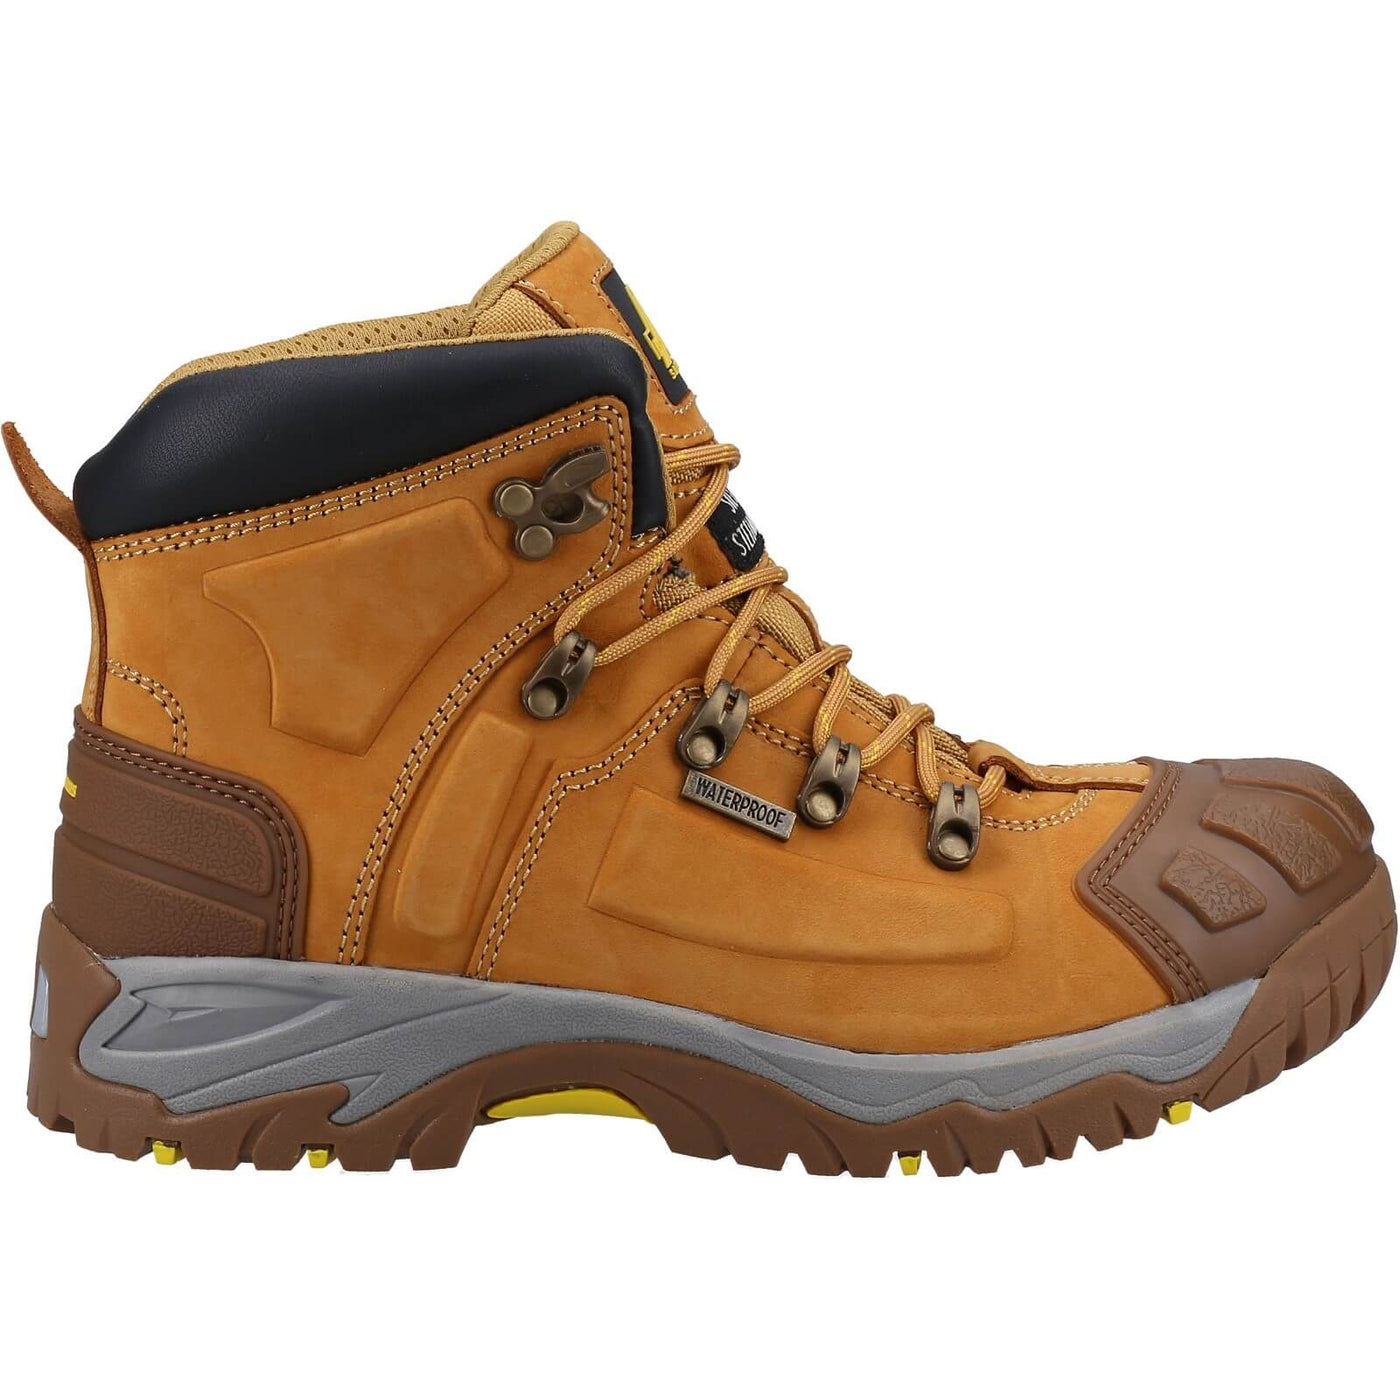 Amblers 33 Waterproof Safety Boots Honey 4#colour_honey